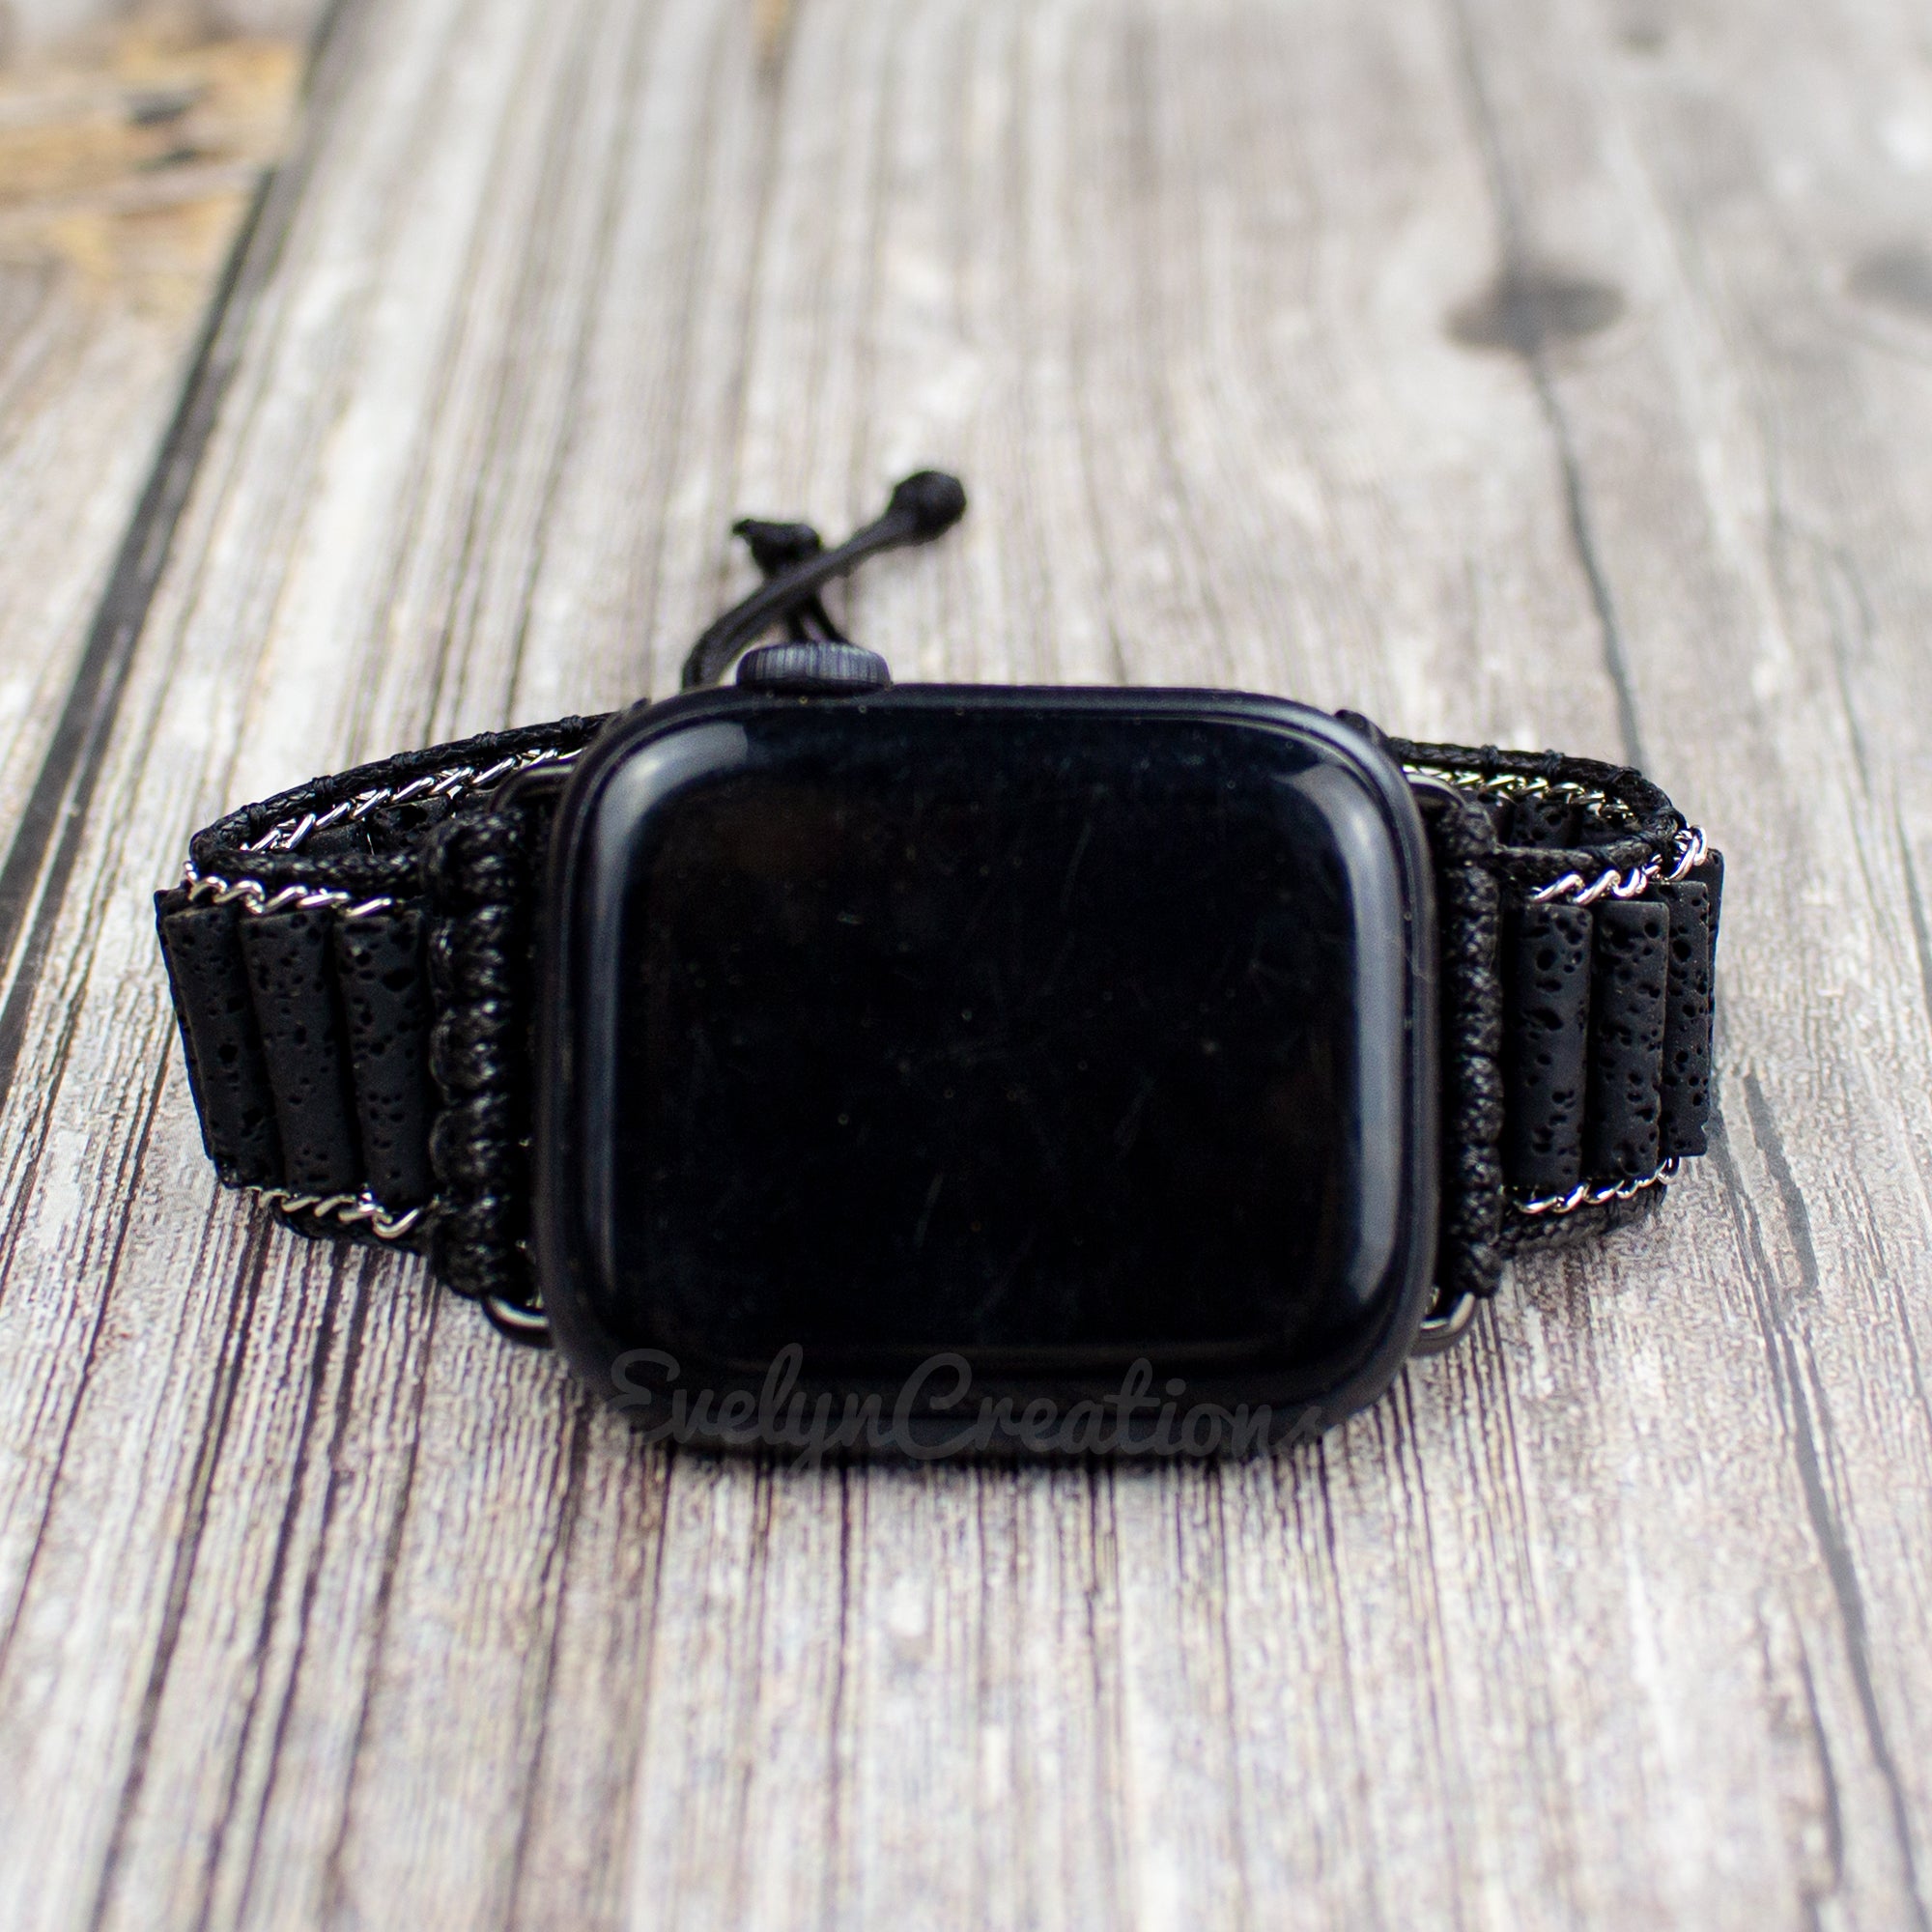 Natural Lava Stone Watch Strap Band for Apple